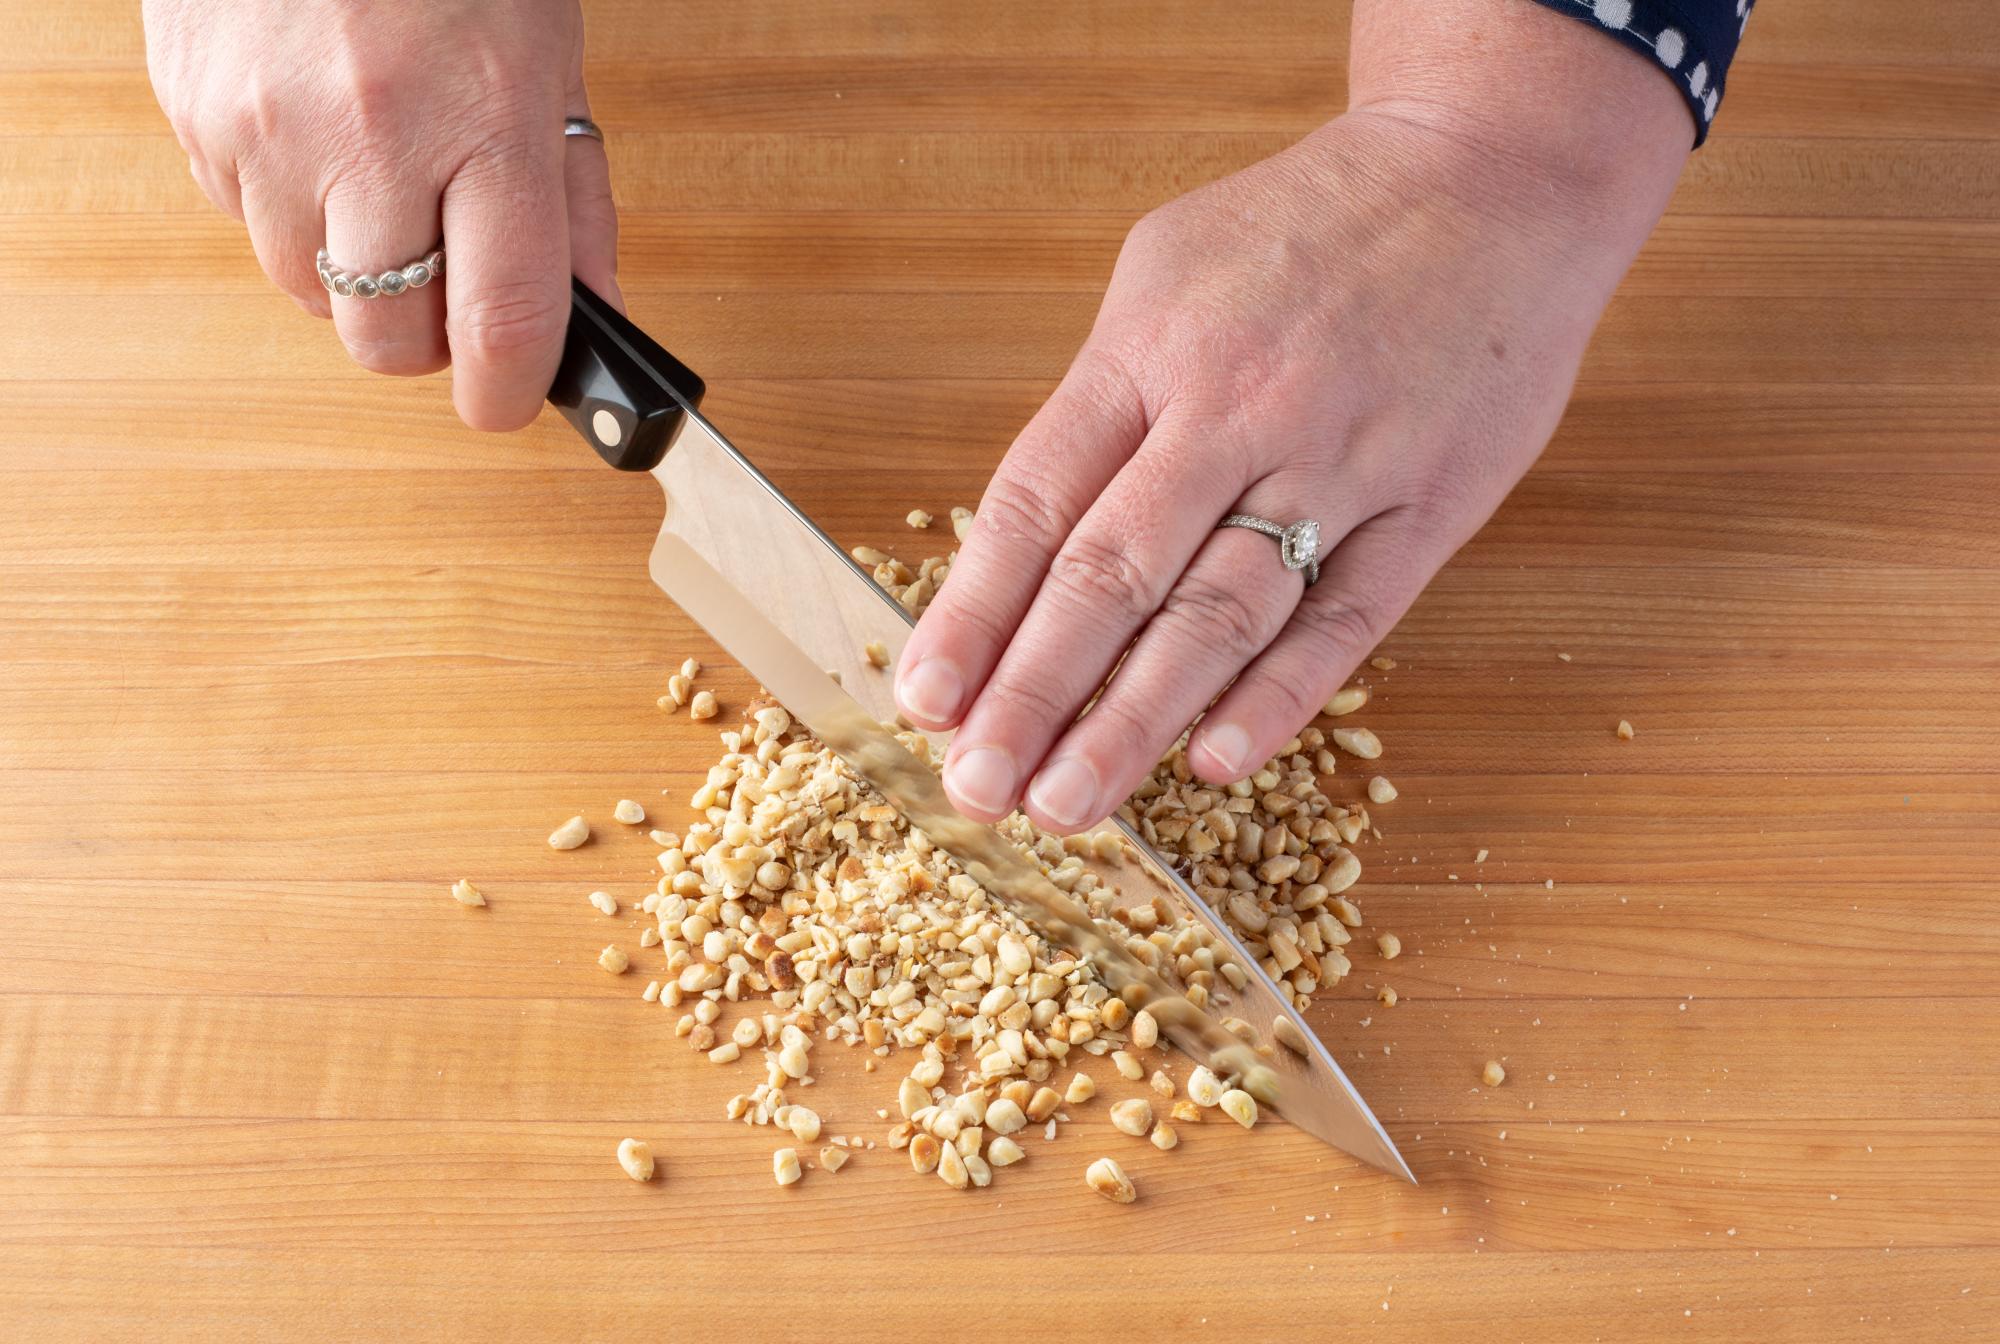 Chopping the pine nuts with a Petite Chef.